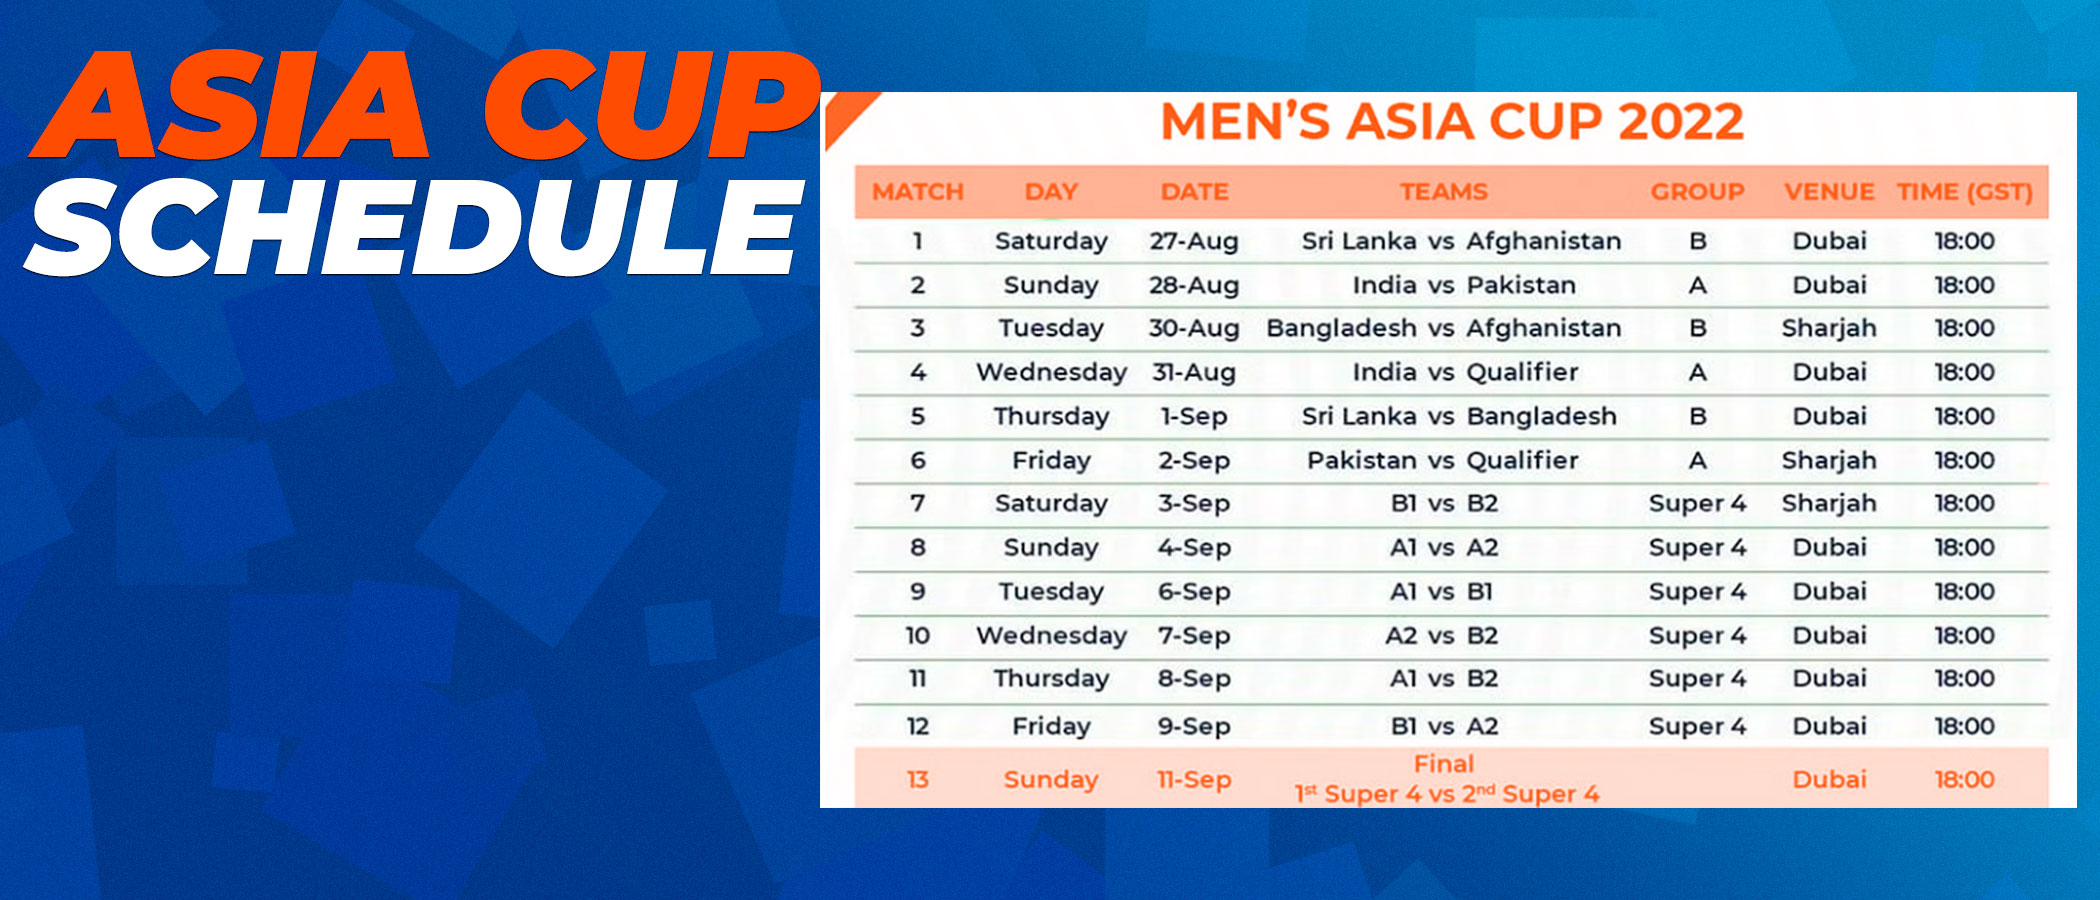 All matches in the Asia Cup.